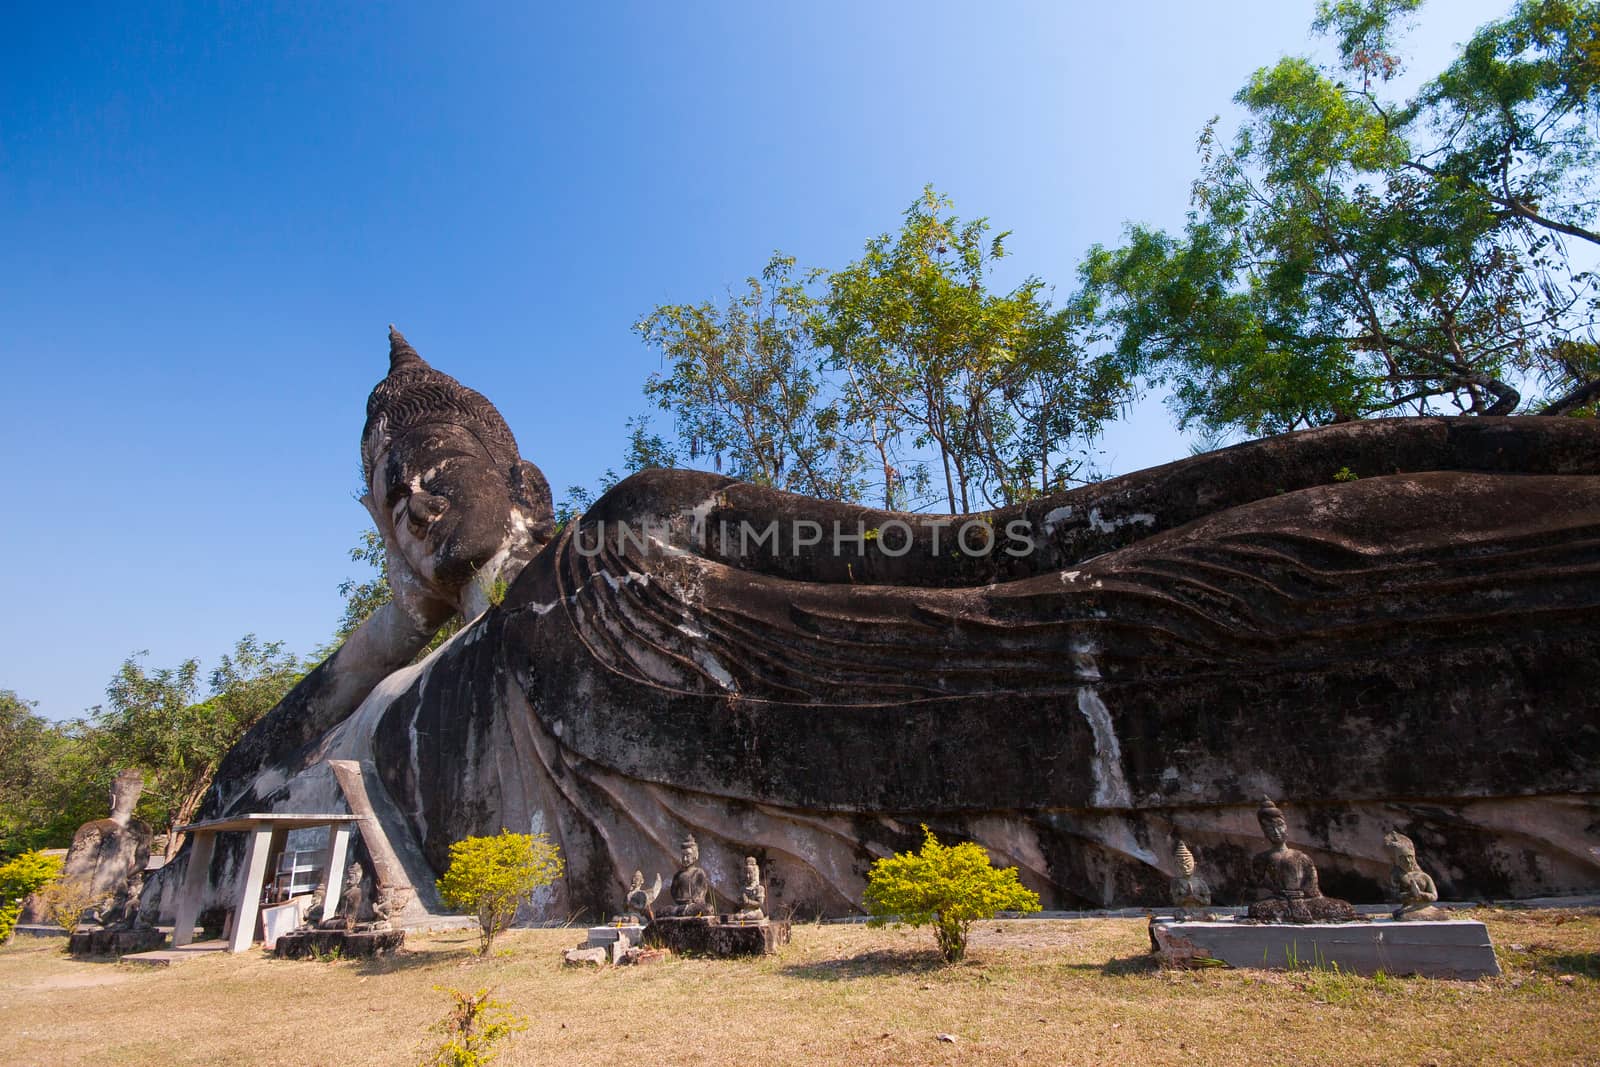 Buddha park in Vientiane, Laos. Famous travel tourist landmark of Buddhist stone statues and religious figures